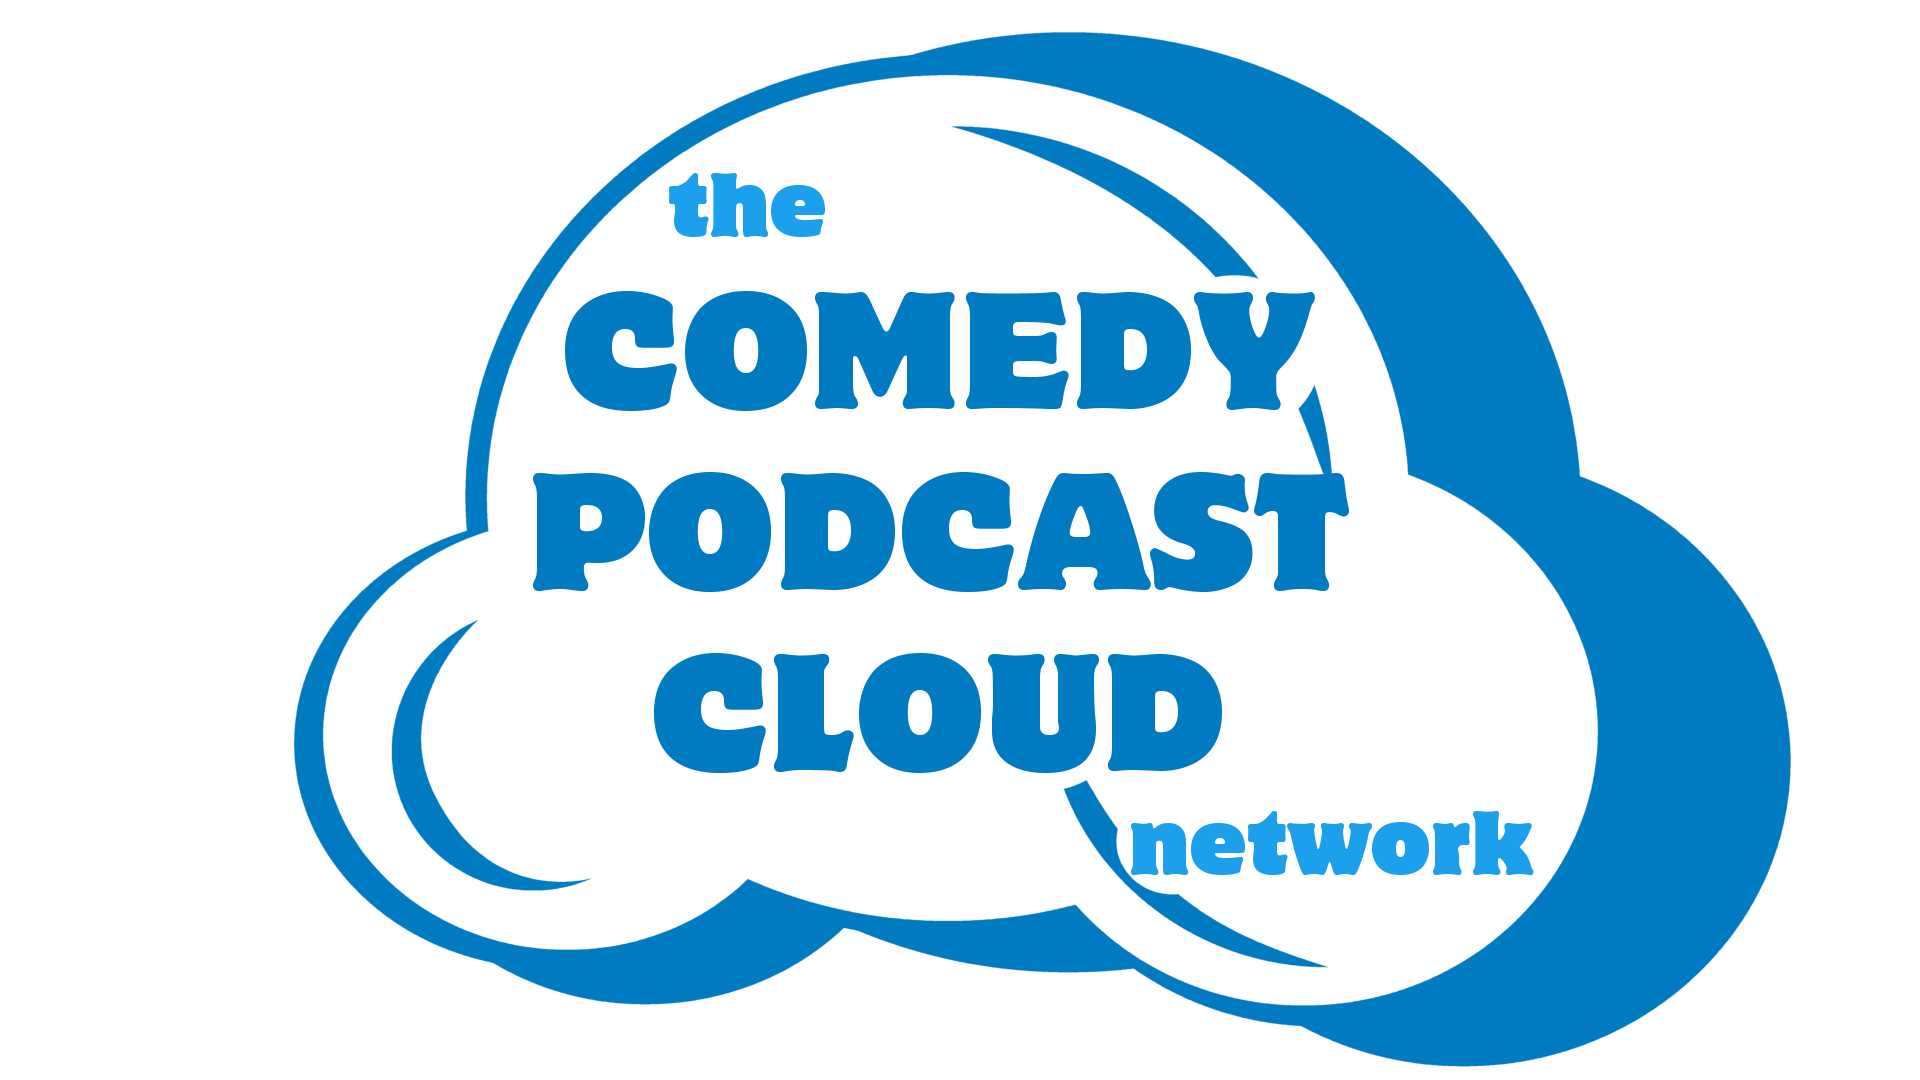 The Comedy Podcast Cloud Network